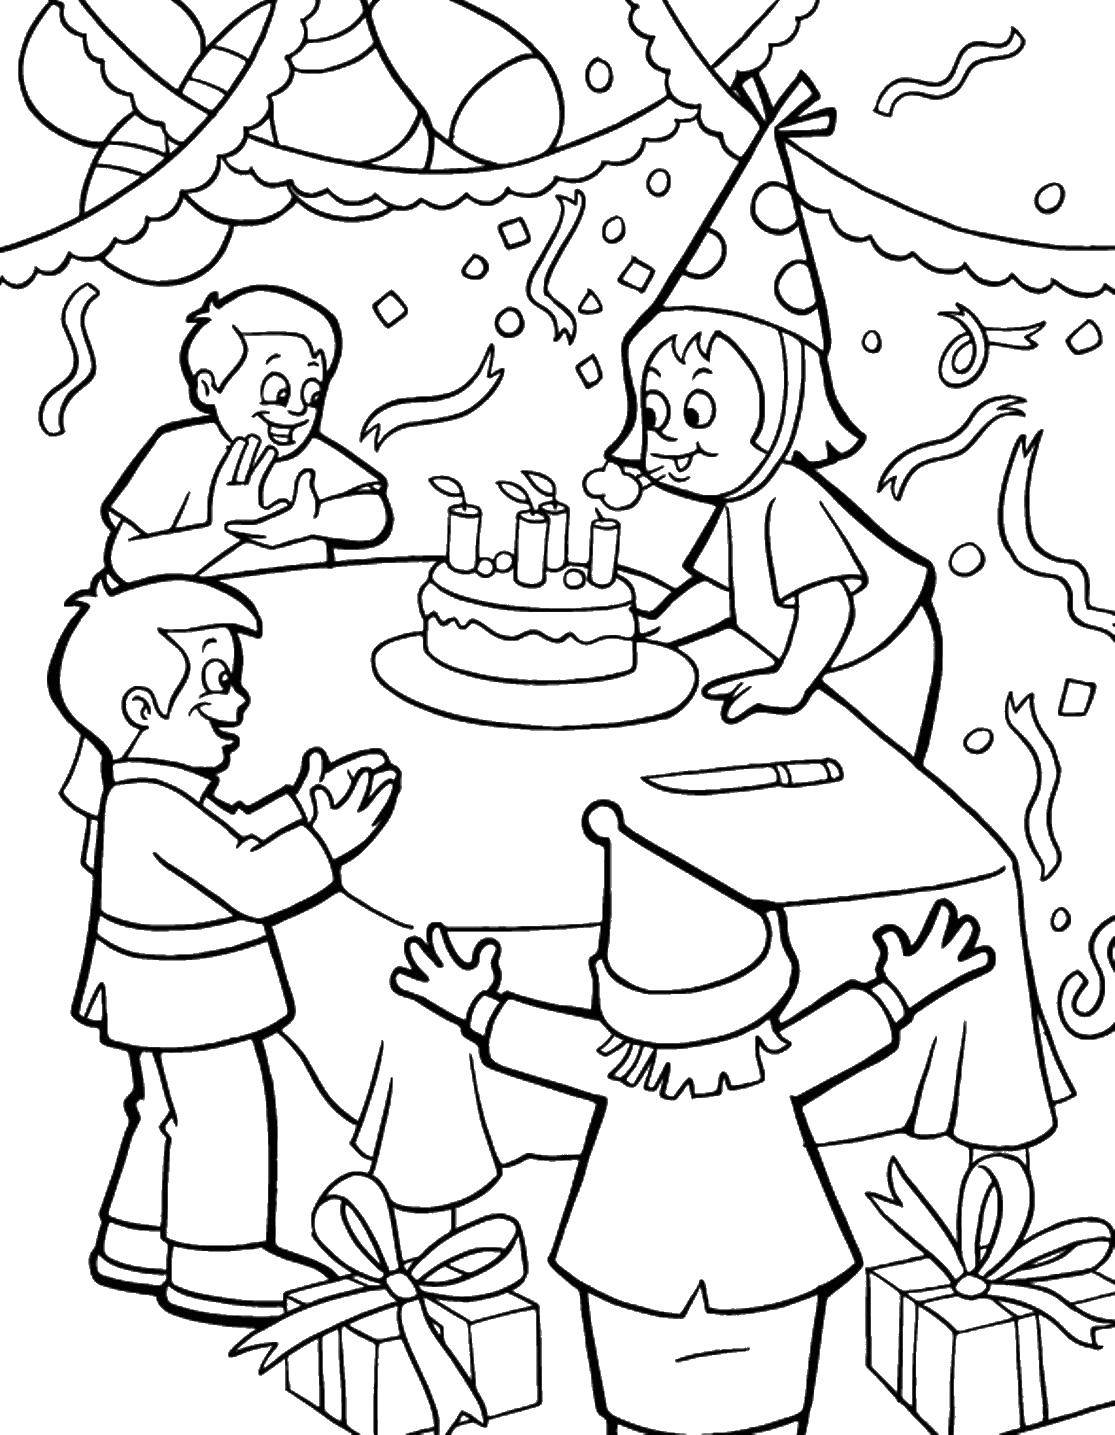 Coloring Blow out the candles. Category holiday. Tags:  Birthday.